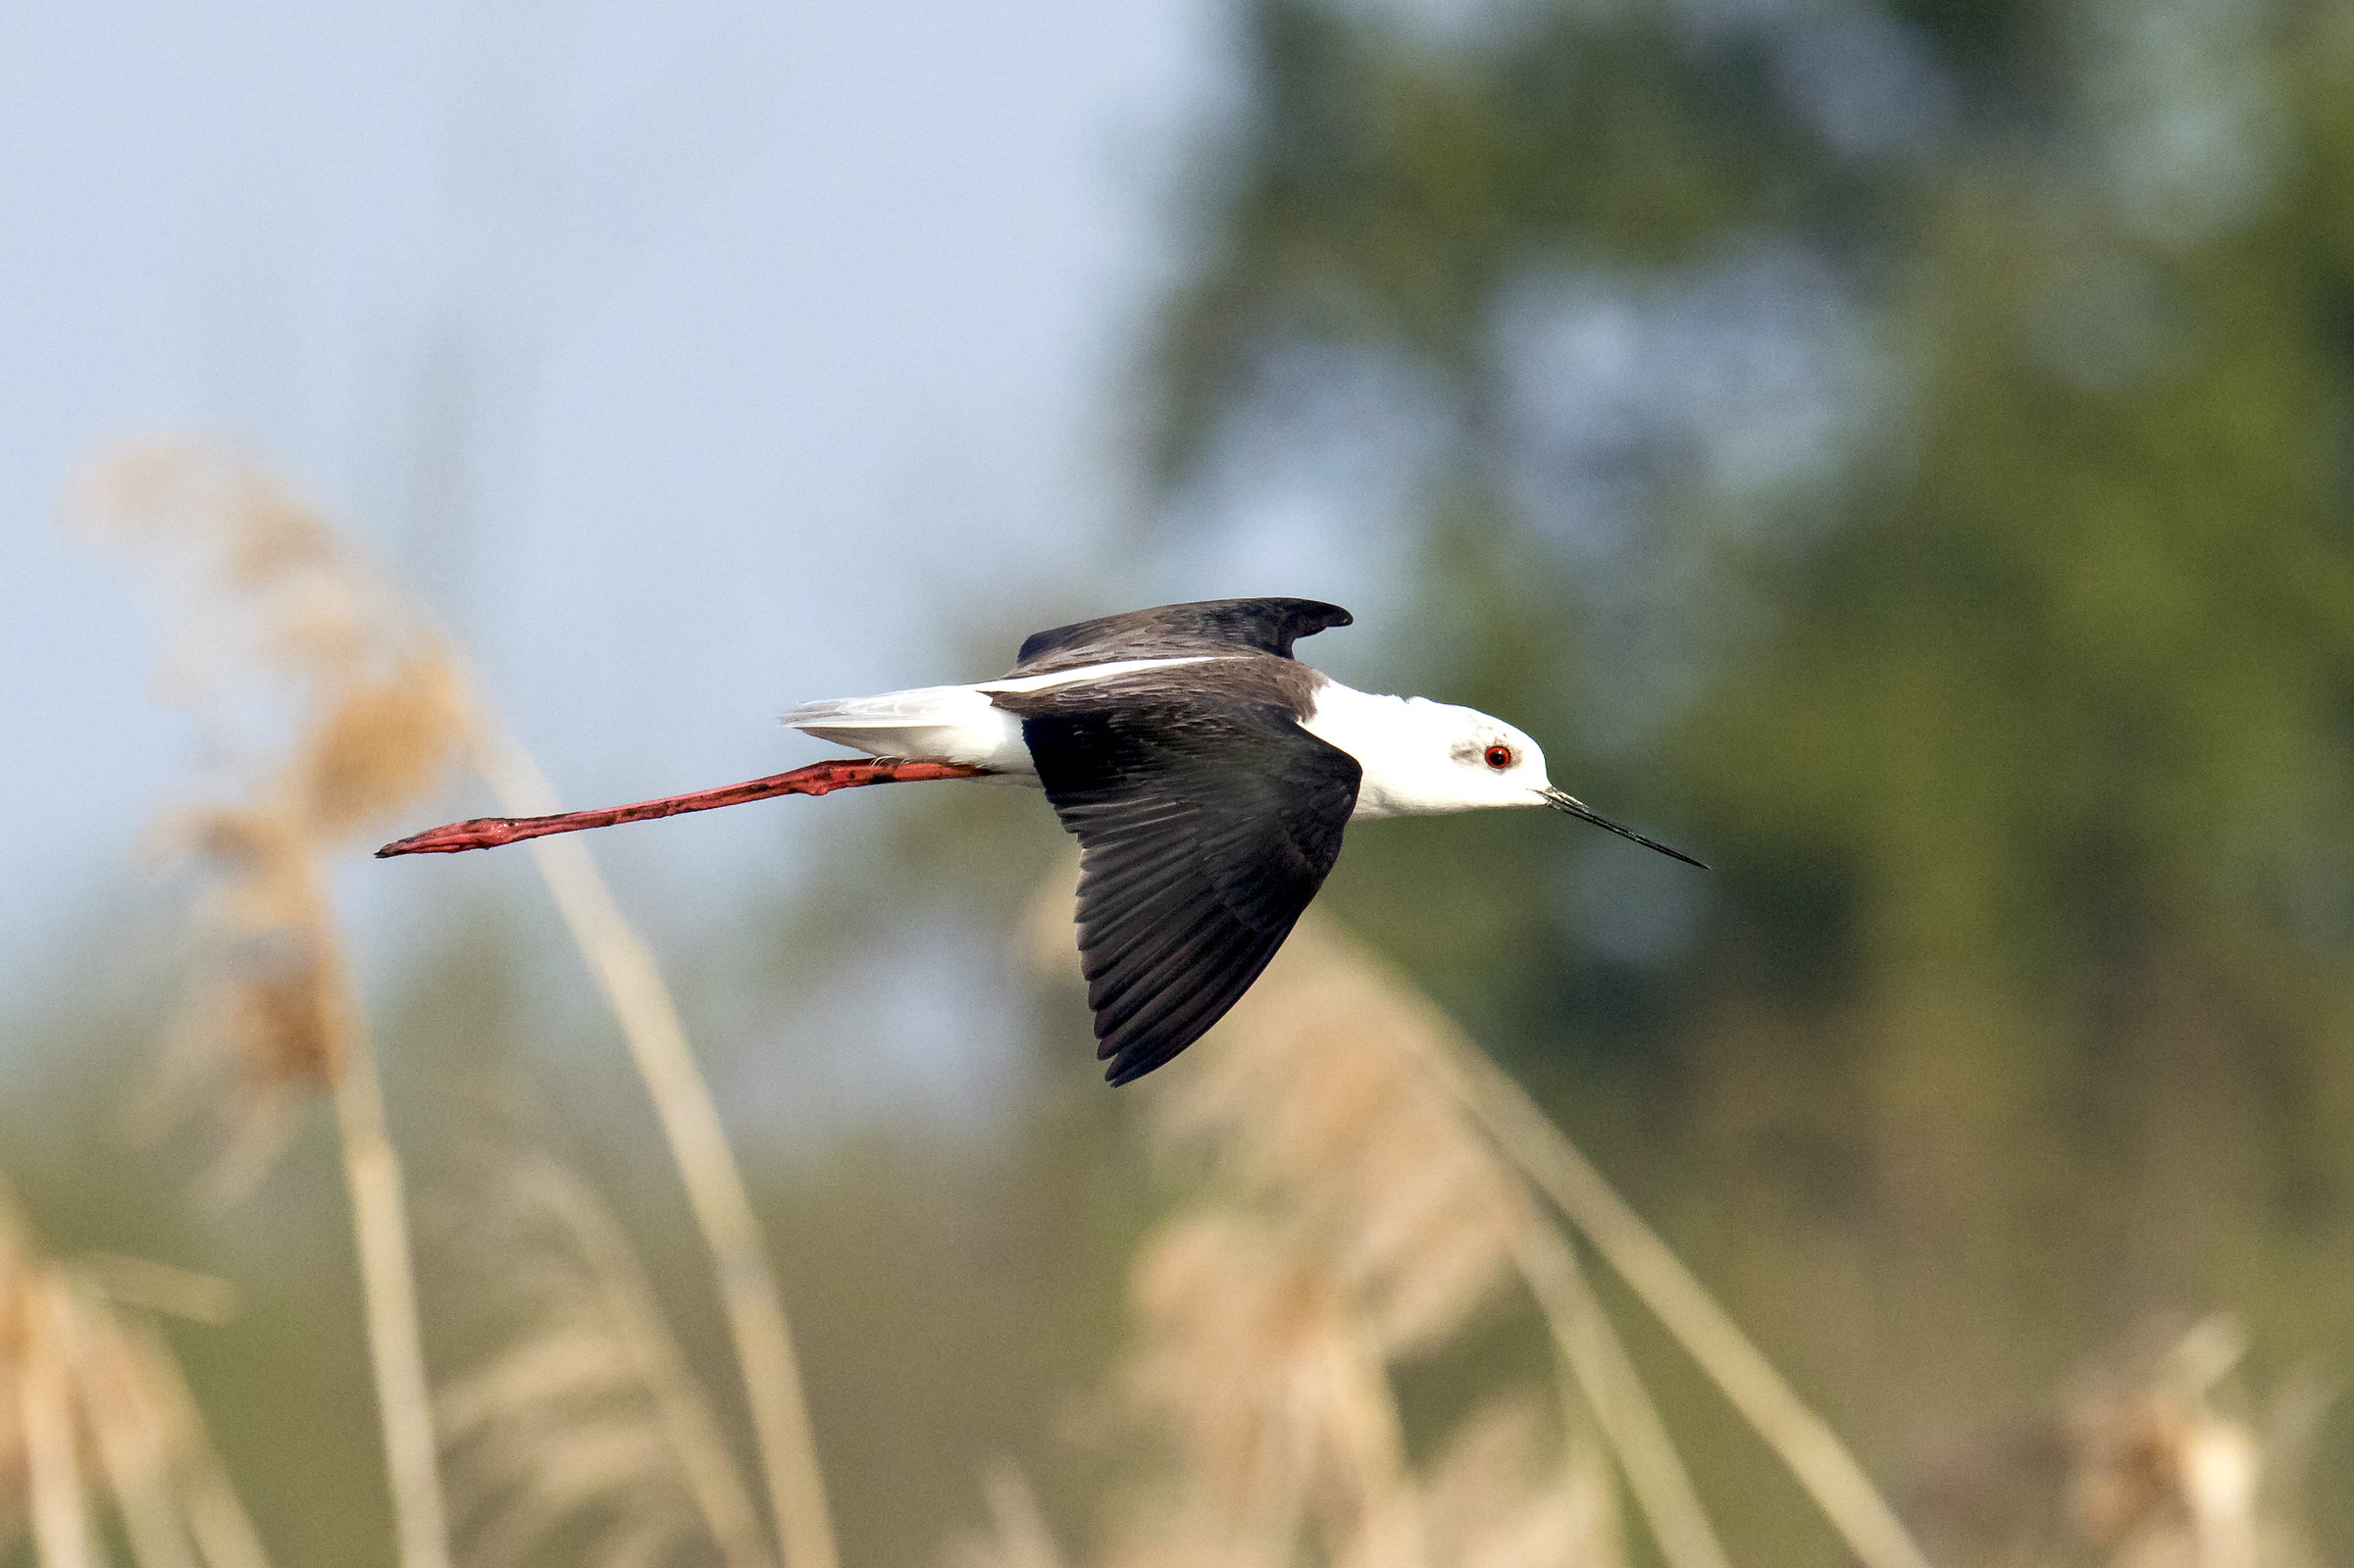 In flight over the reed...